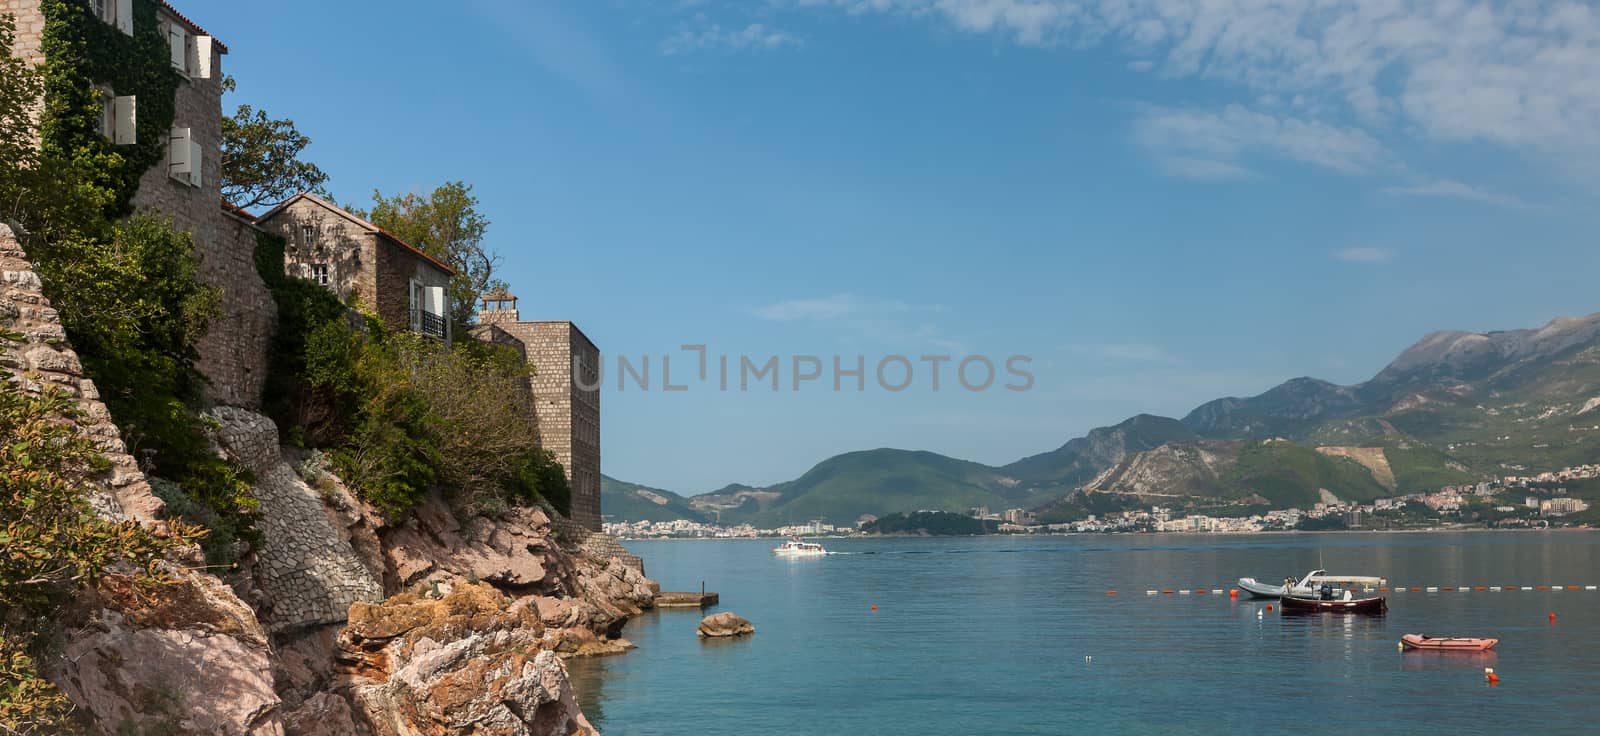 St. Stephan island in Montenegro by master1305